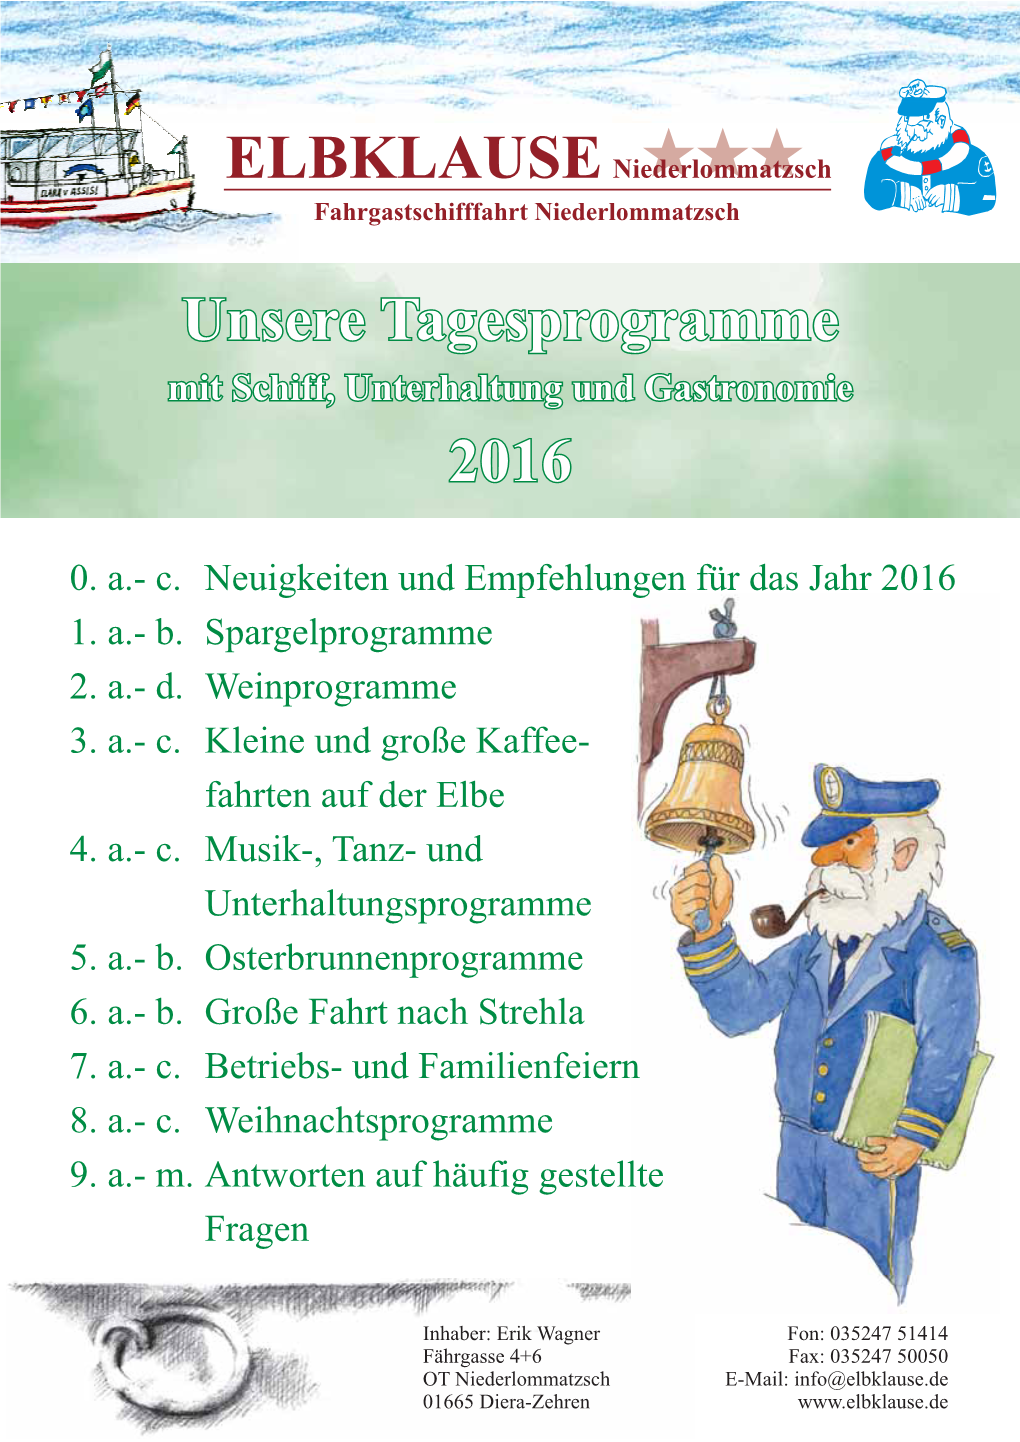 *** Unsere Tagesprogramme 2016